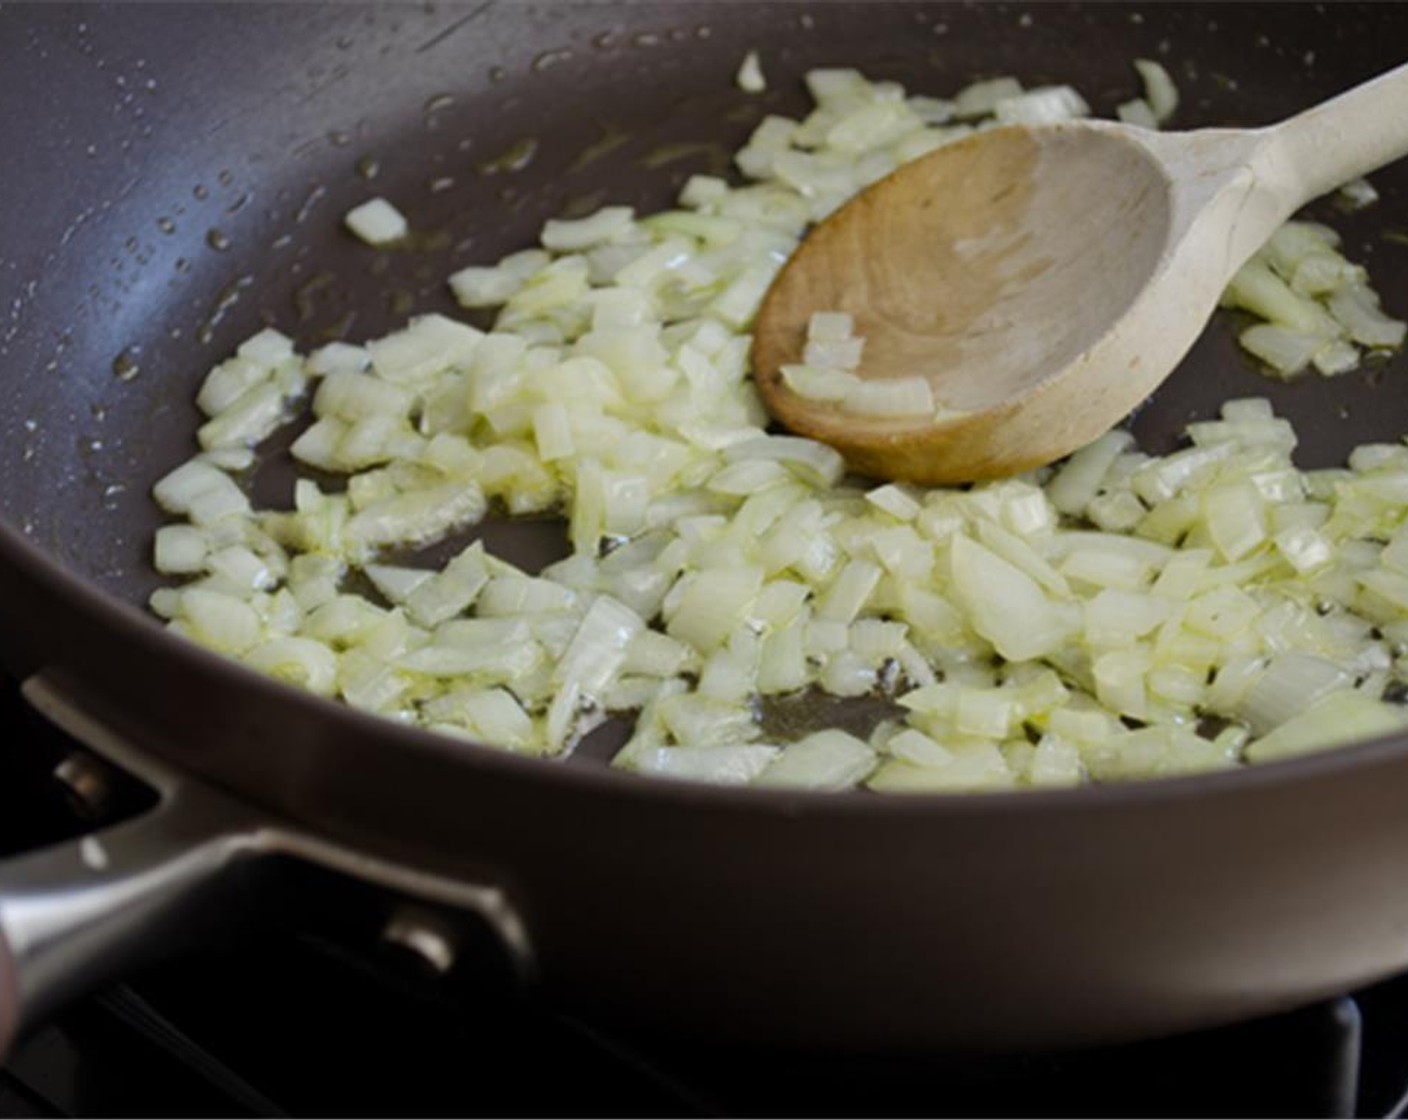 step 1 Heat the Extra-Virgin Olive Oil (1/4 cup) in a large pan over medium heat. Cook the Yellow Onions (1 1/2 cups) stirring frequently, until soft and translucent, about 8 minutes. Do not brown.